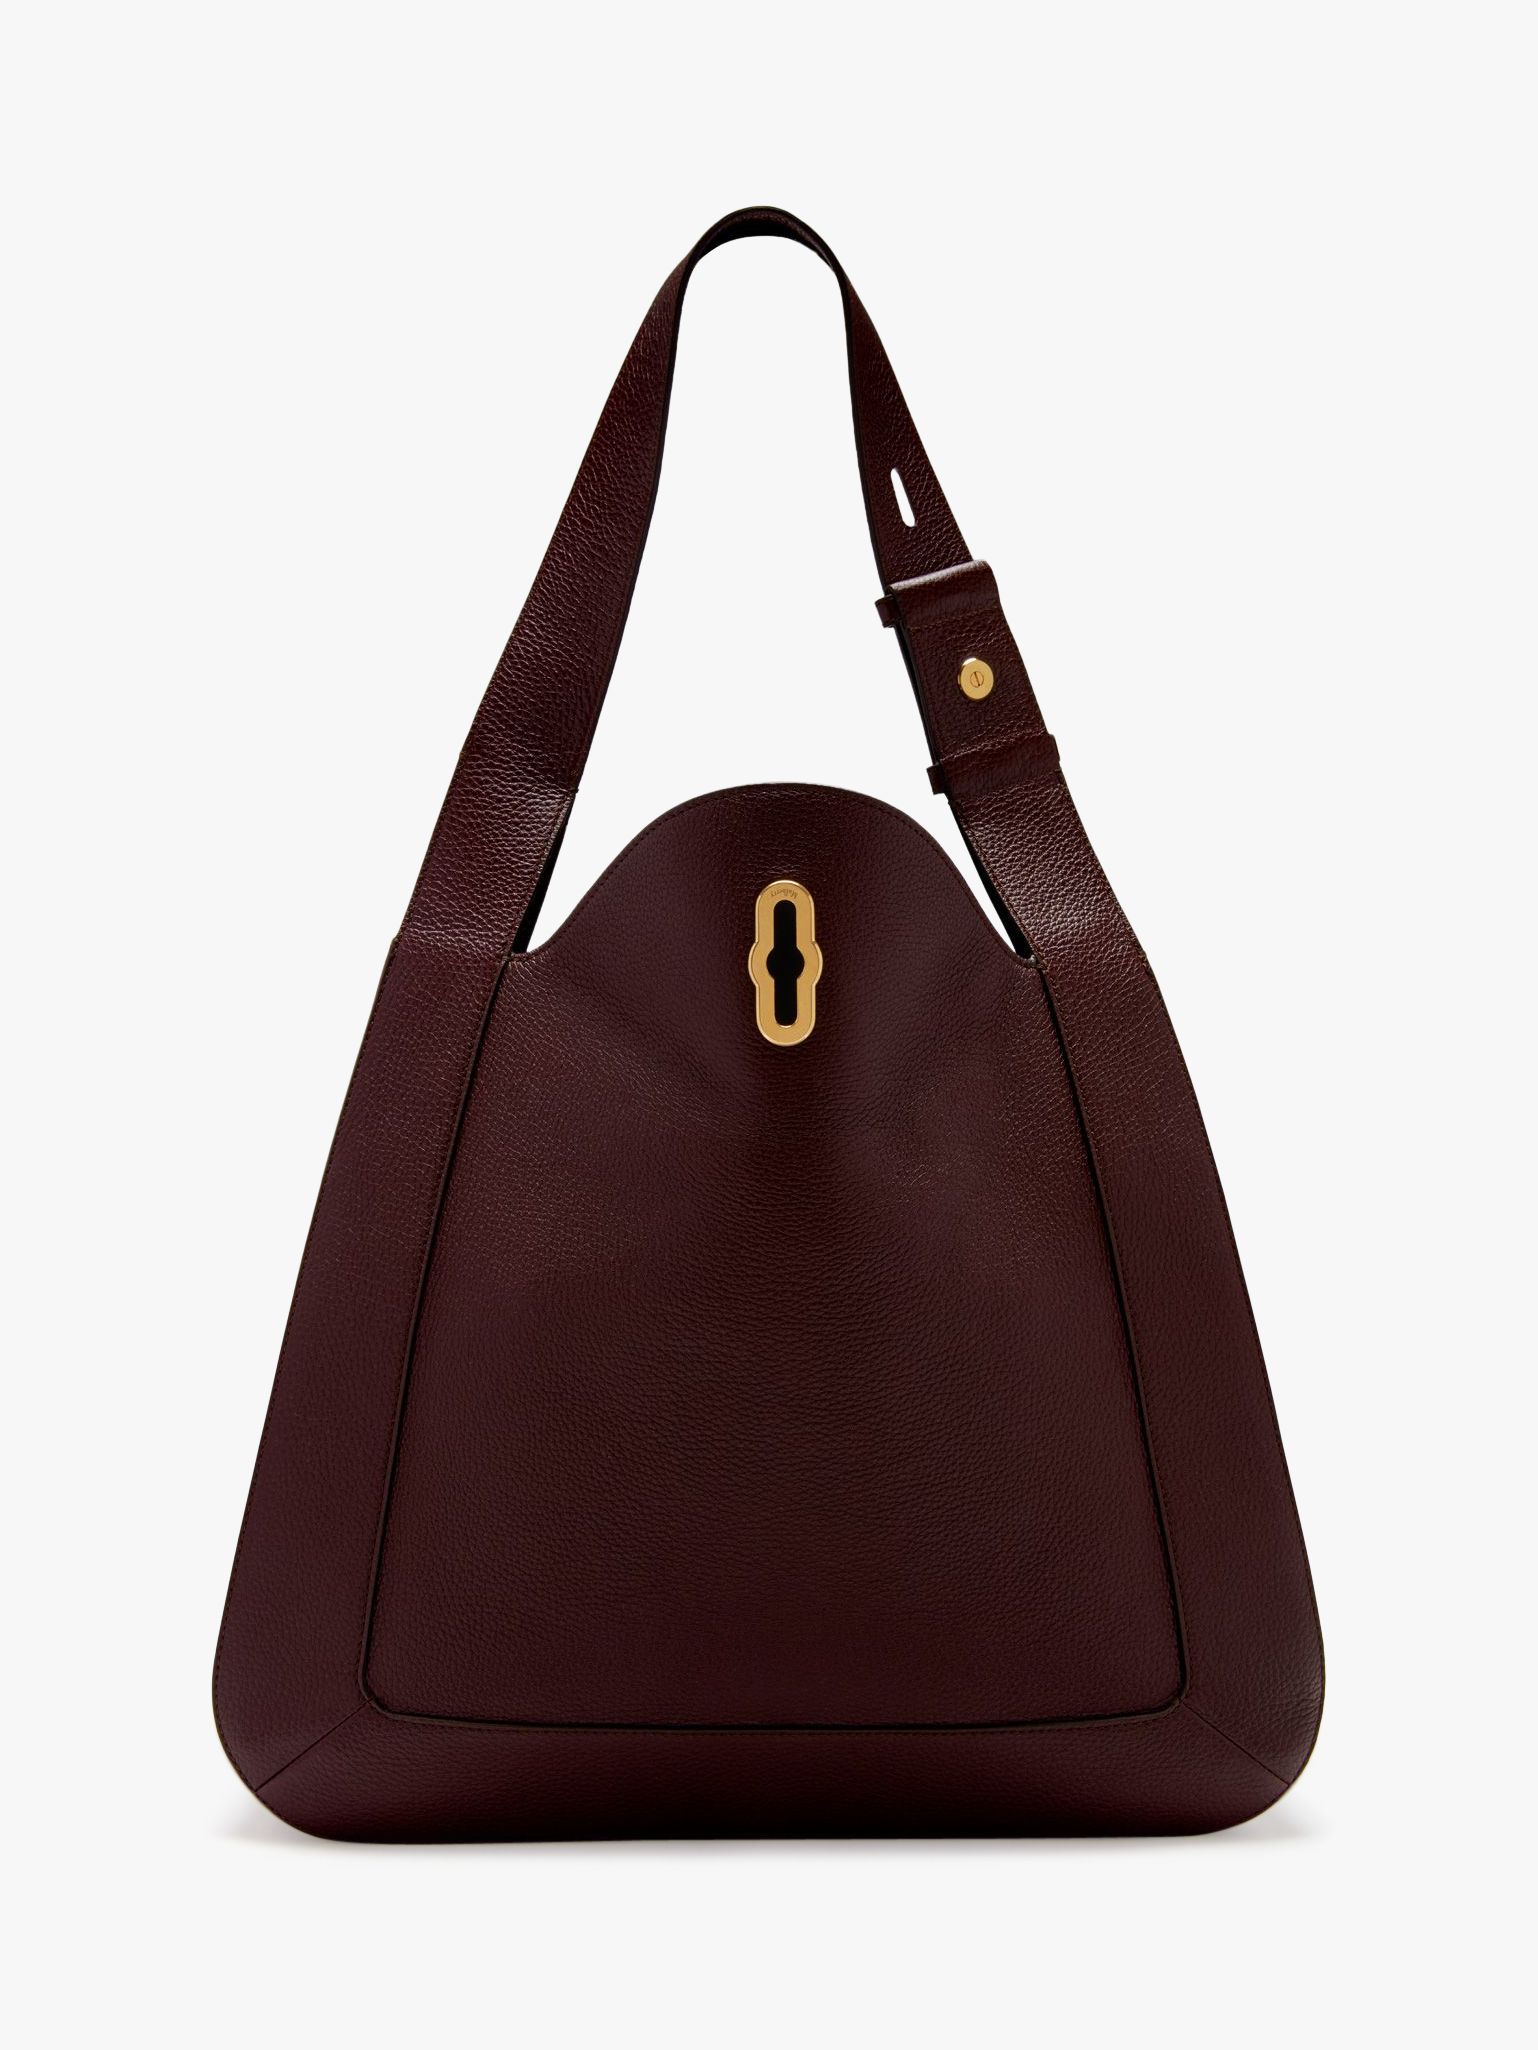 Mulberry Marloes Small Classic Grain Leather Hobo Bag at John Lewis ...